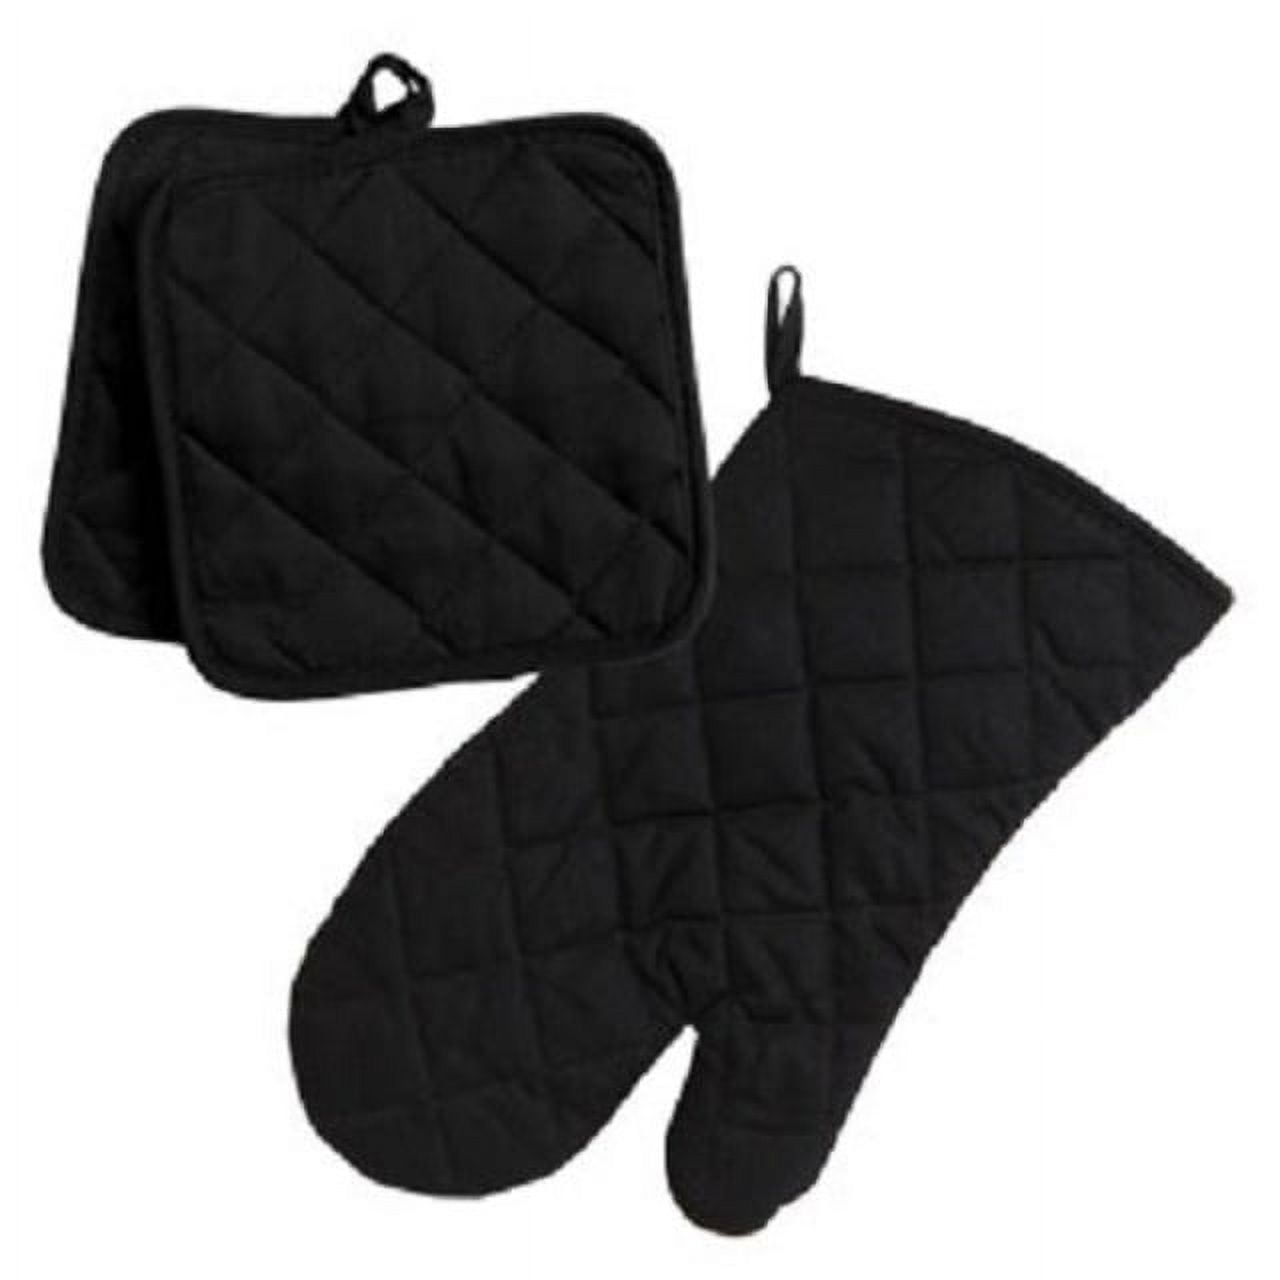 Oven Mitts, Pot Holders, Black Polyester/Rubber Oven Mitts 9x7 in. - 4 Pack